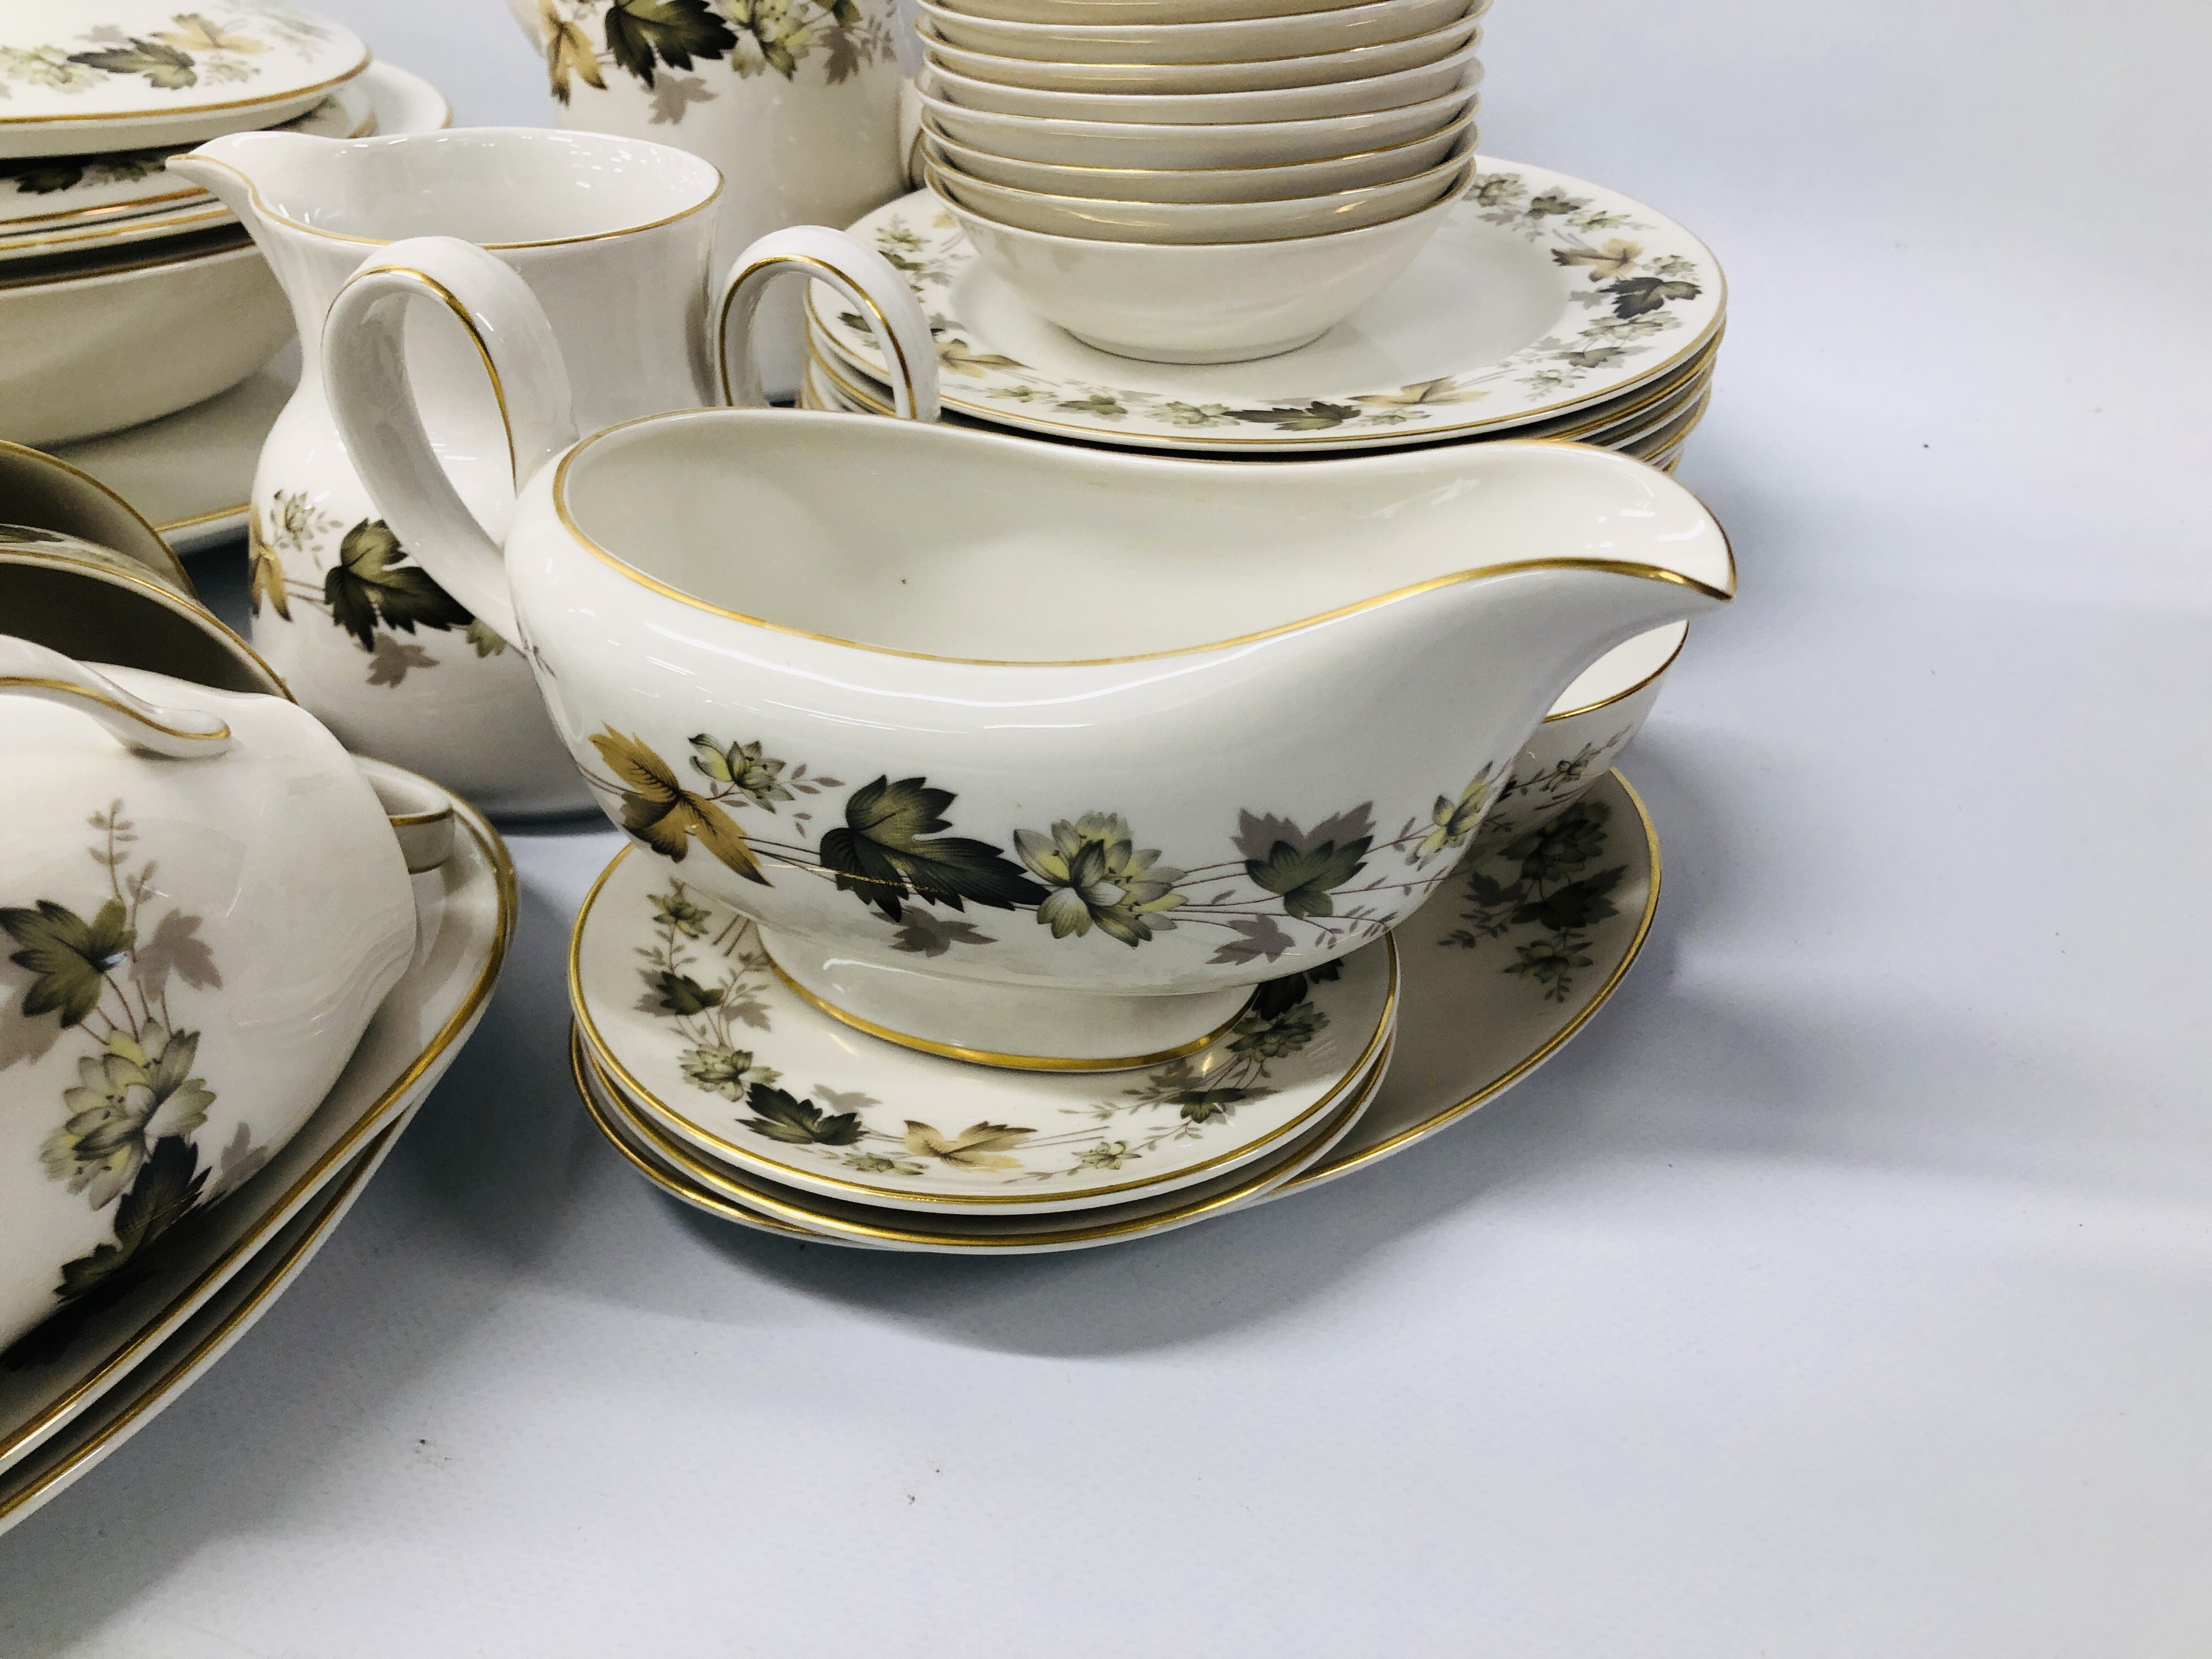 COLLECTION OF ROYAL DOULTON "LARCHMONT" TC1019 TEA AND DINNER WARE (APPROX. - Image 3 of 9